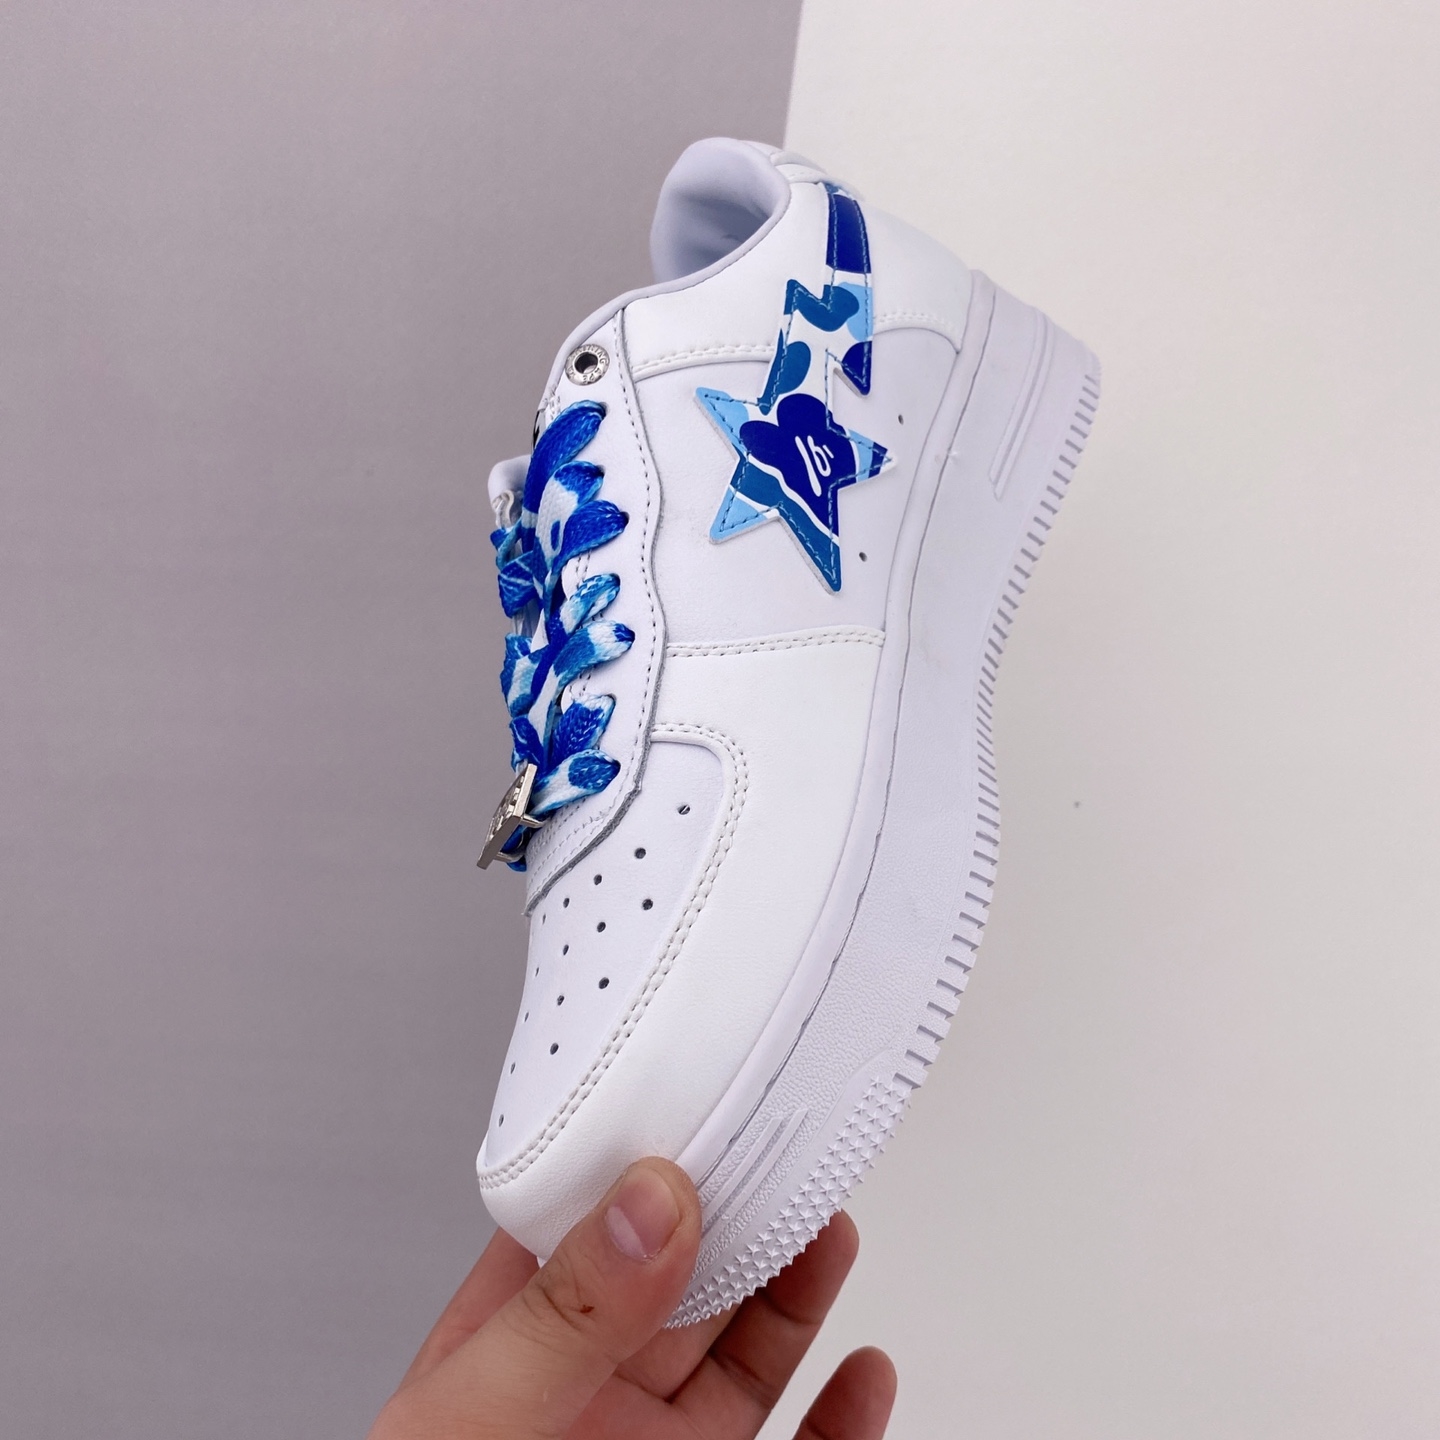 A Bathing Ape Bape Sta Low White ABC Camo Blue 1I70291009 BEI - Trendy and Unique Sneakers